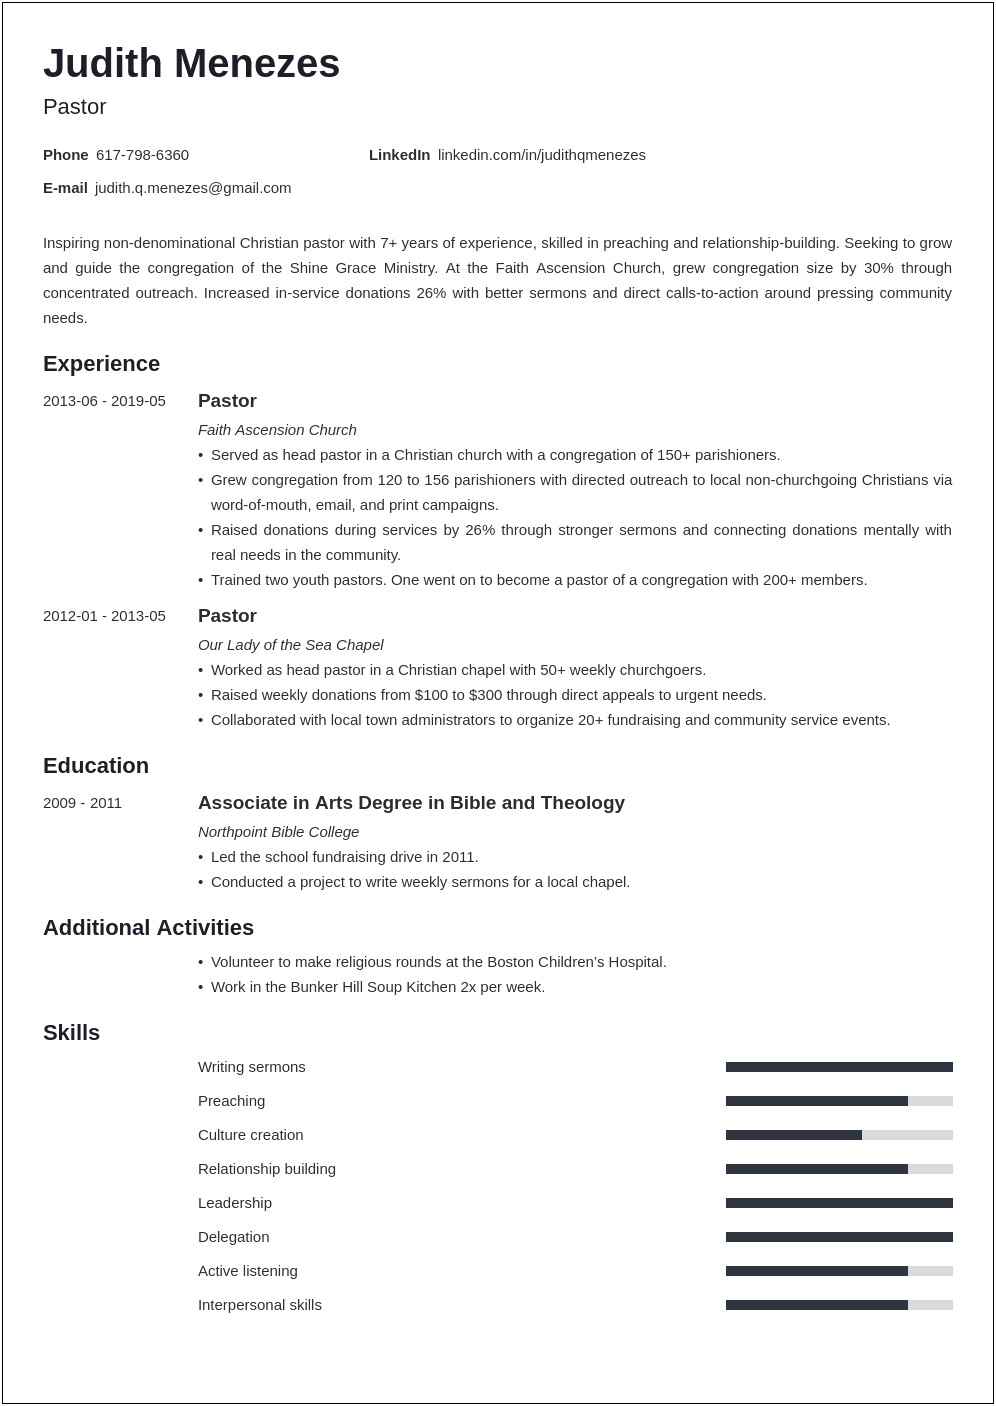 Resume For Pastor Looking For Secular Work